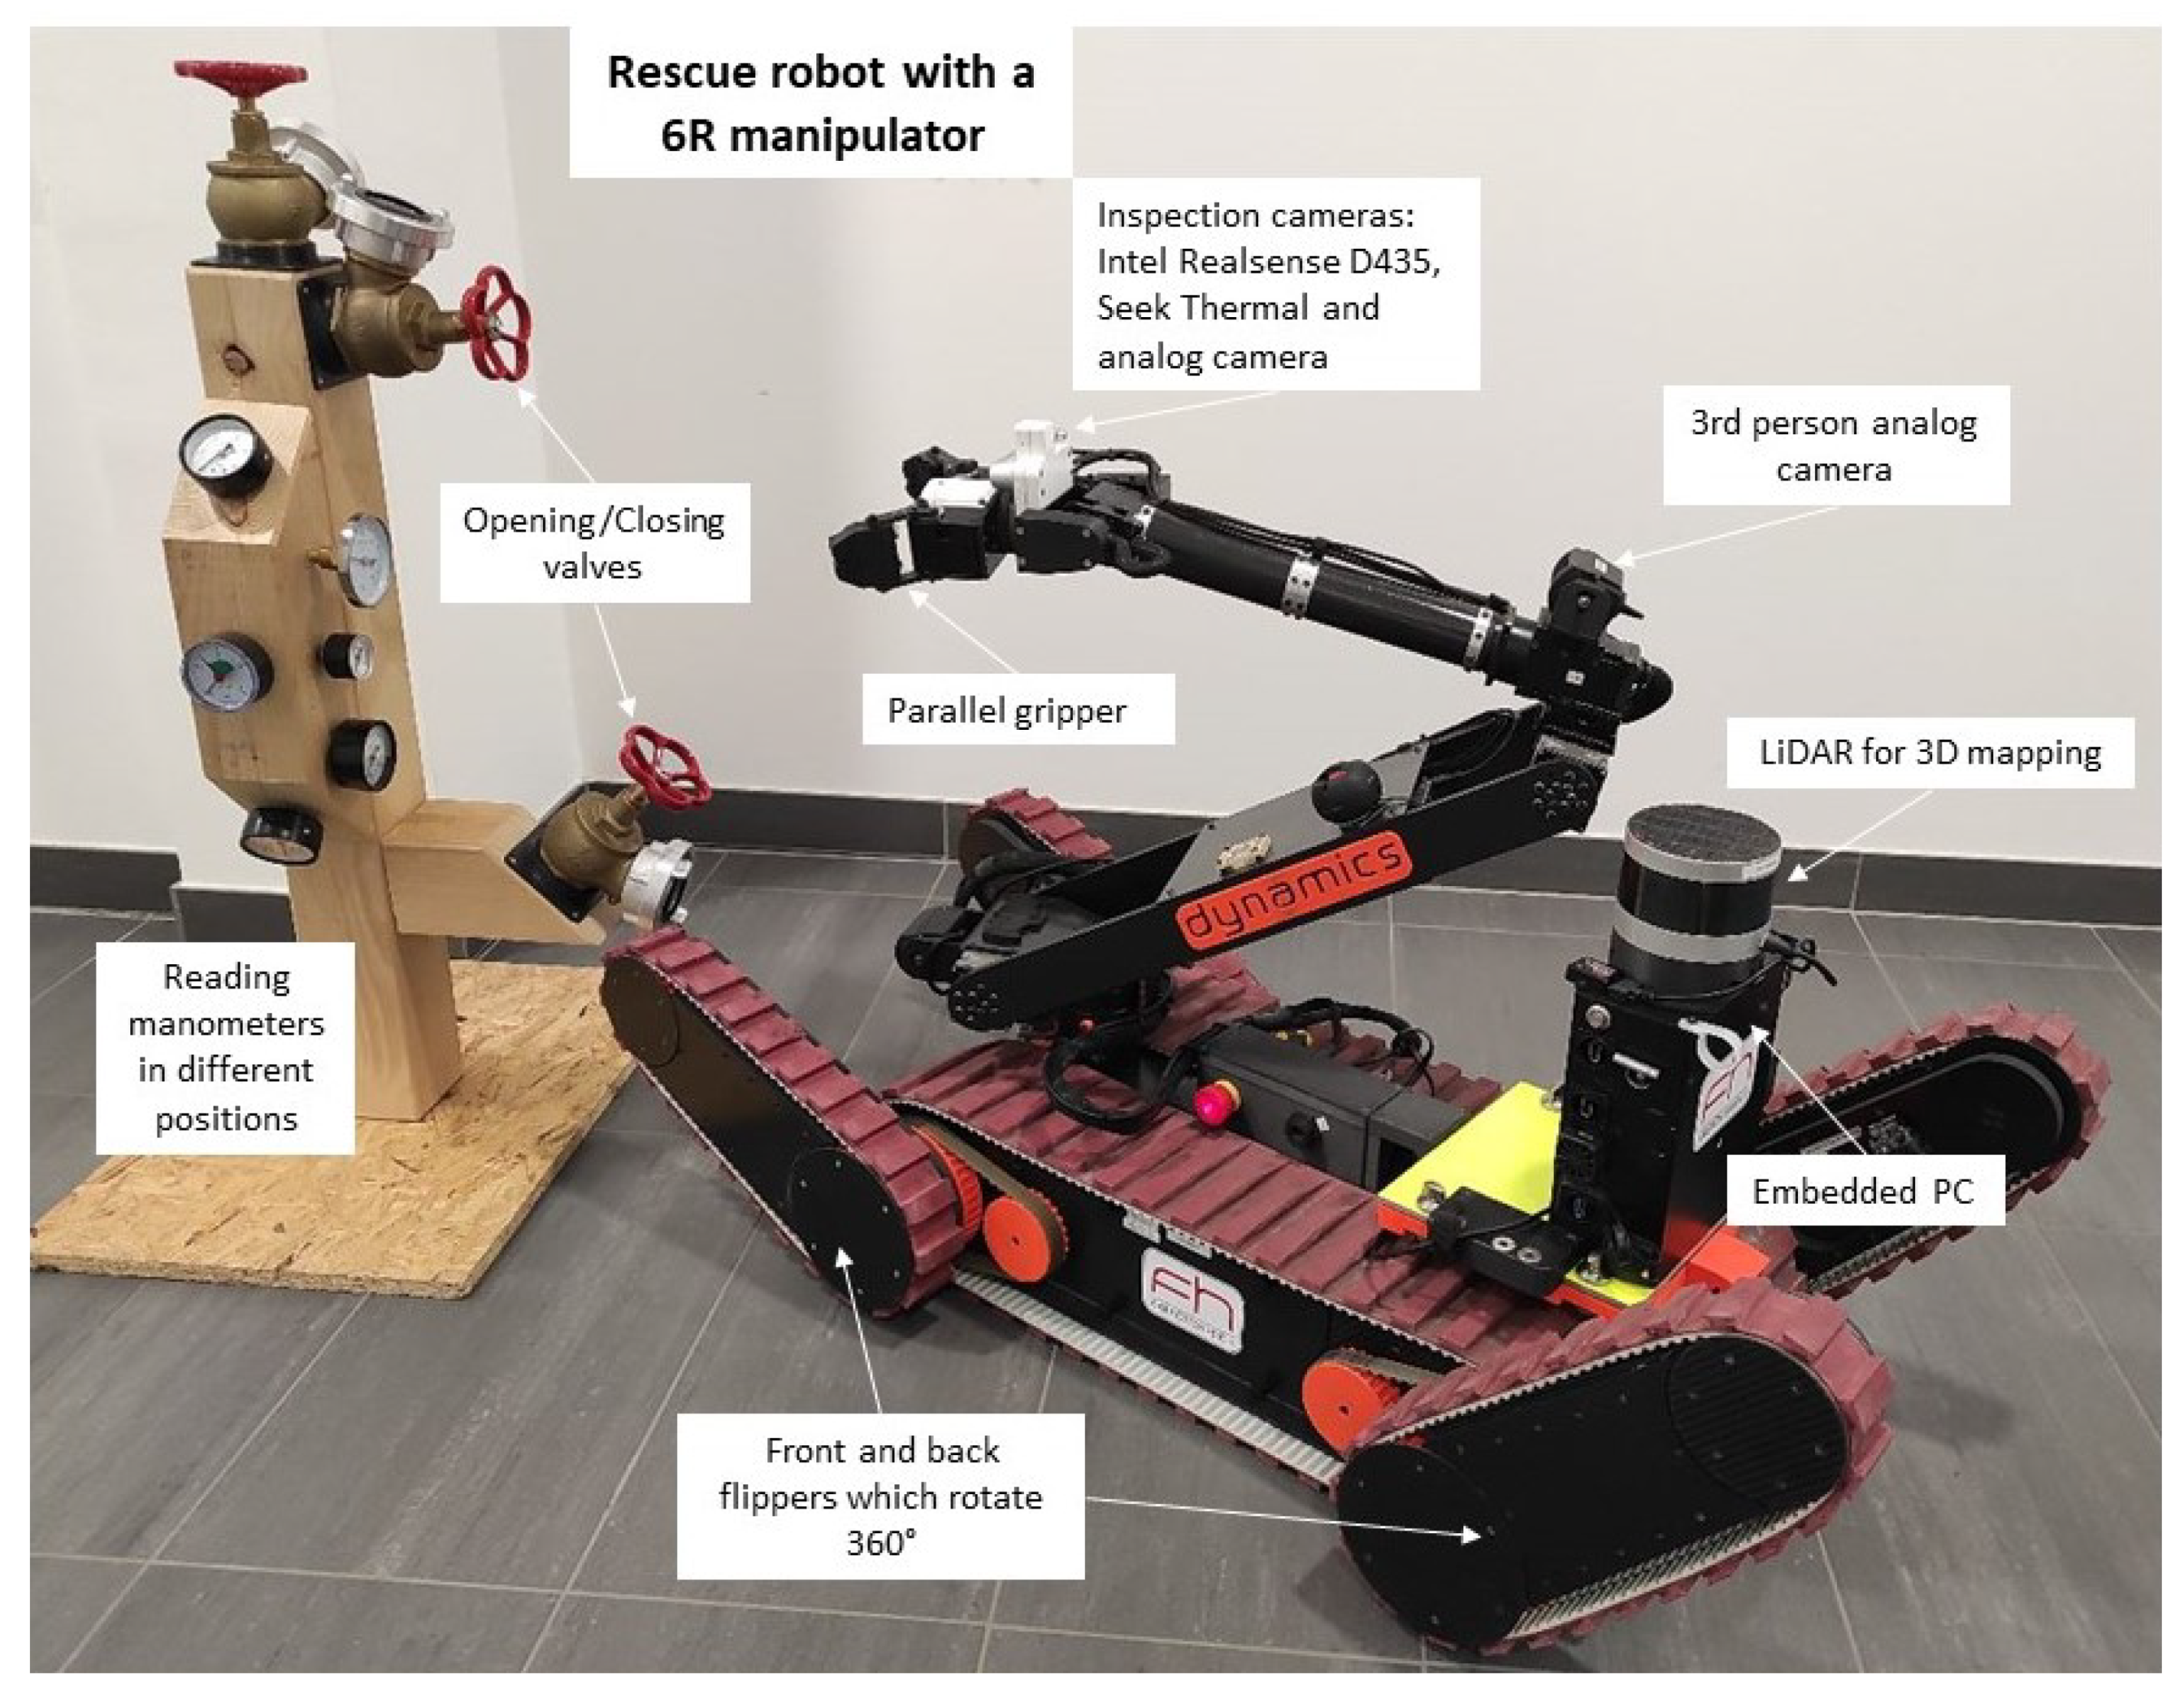 Robotics | Free Full-Text | Inverse Kinematics of an Anthropomorphic 6R  Robot Manipulator Based on a Simple Geometric Approach for Embedded Systems